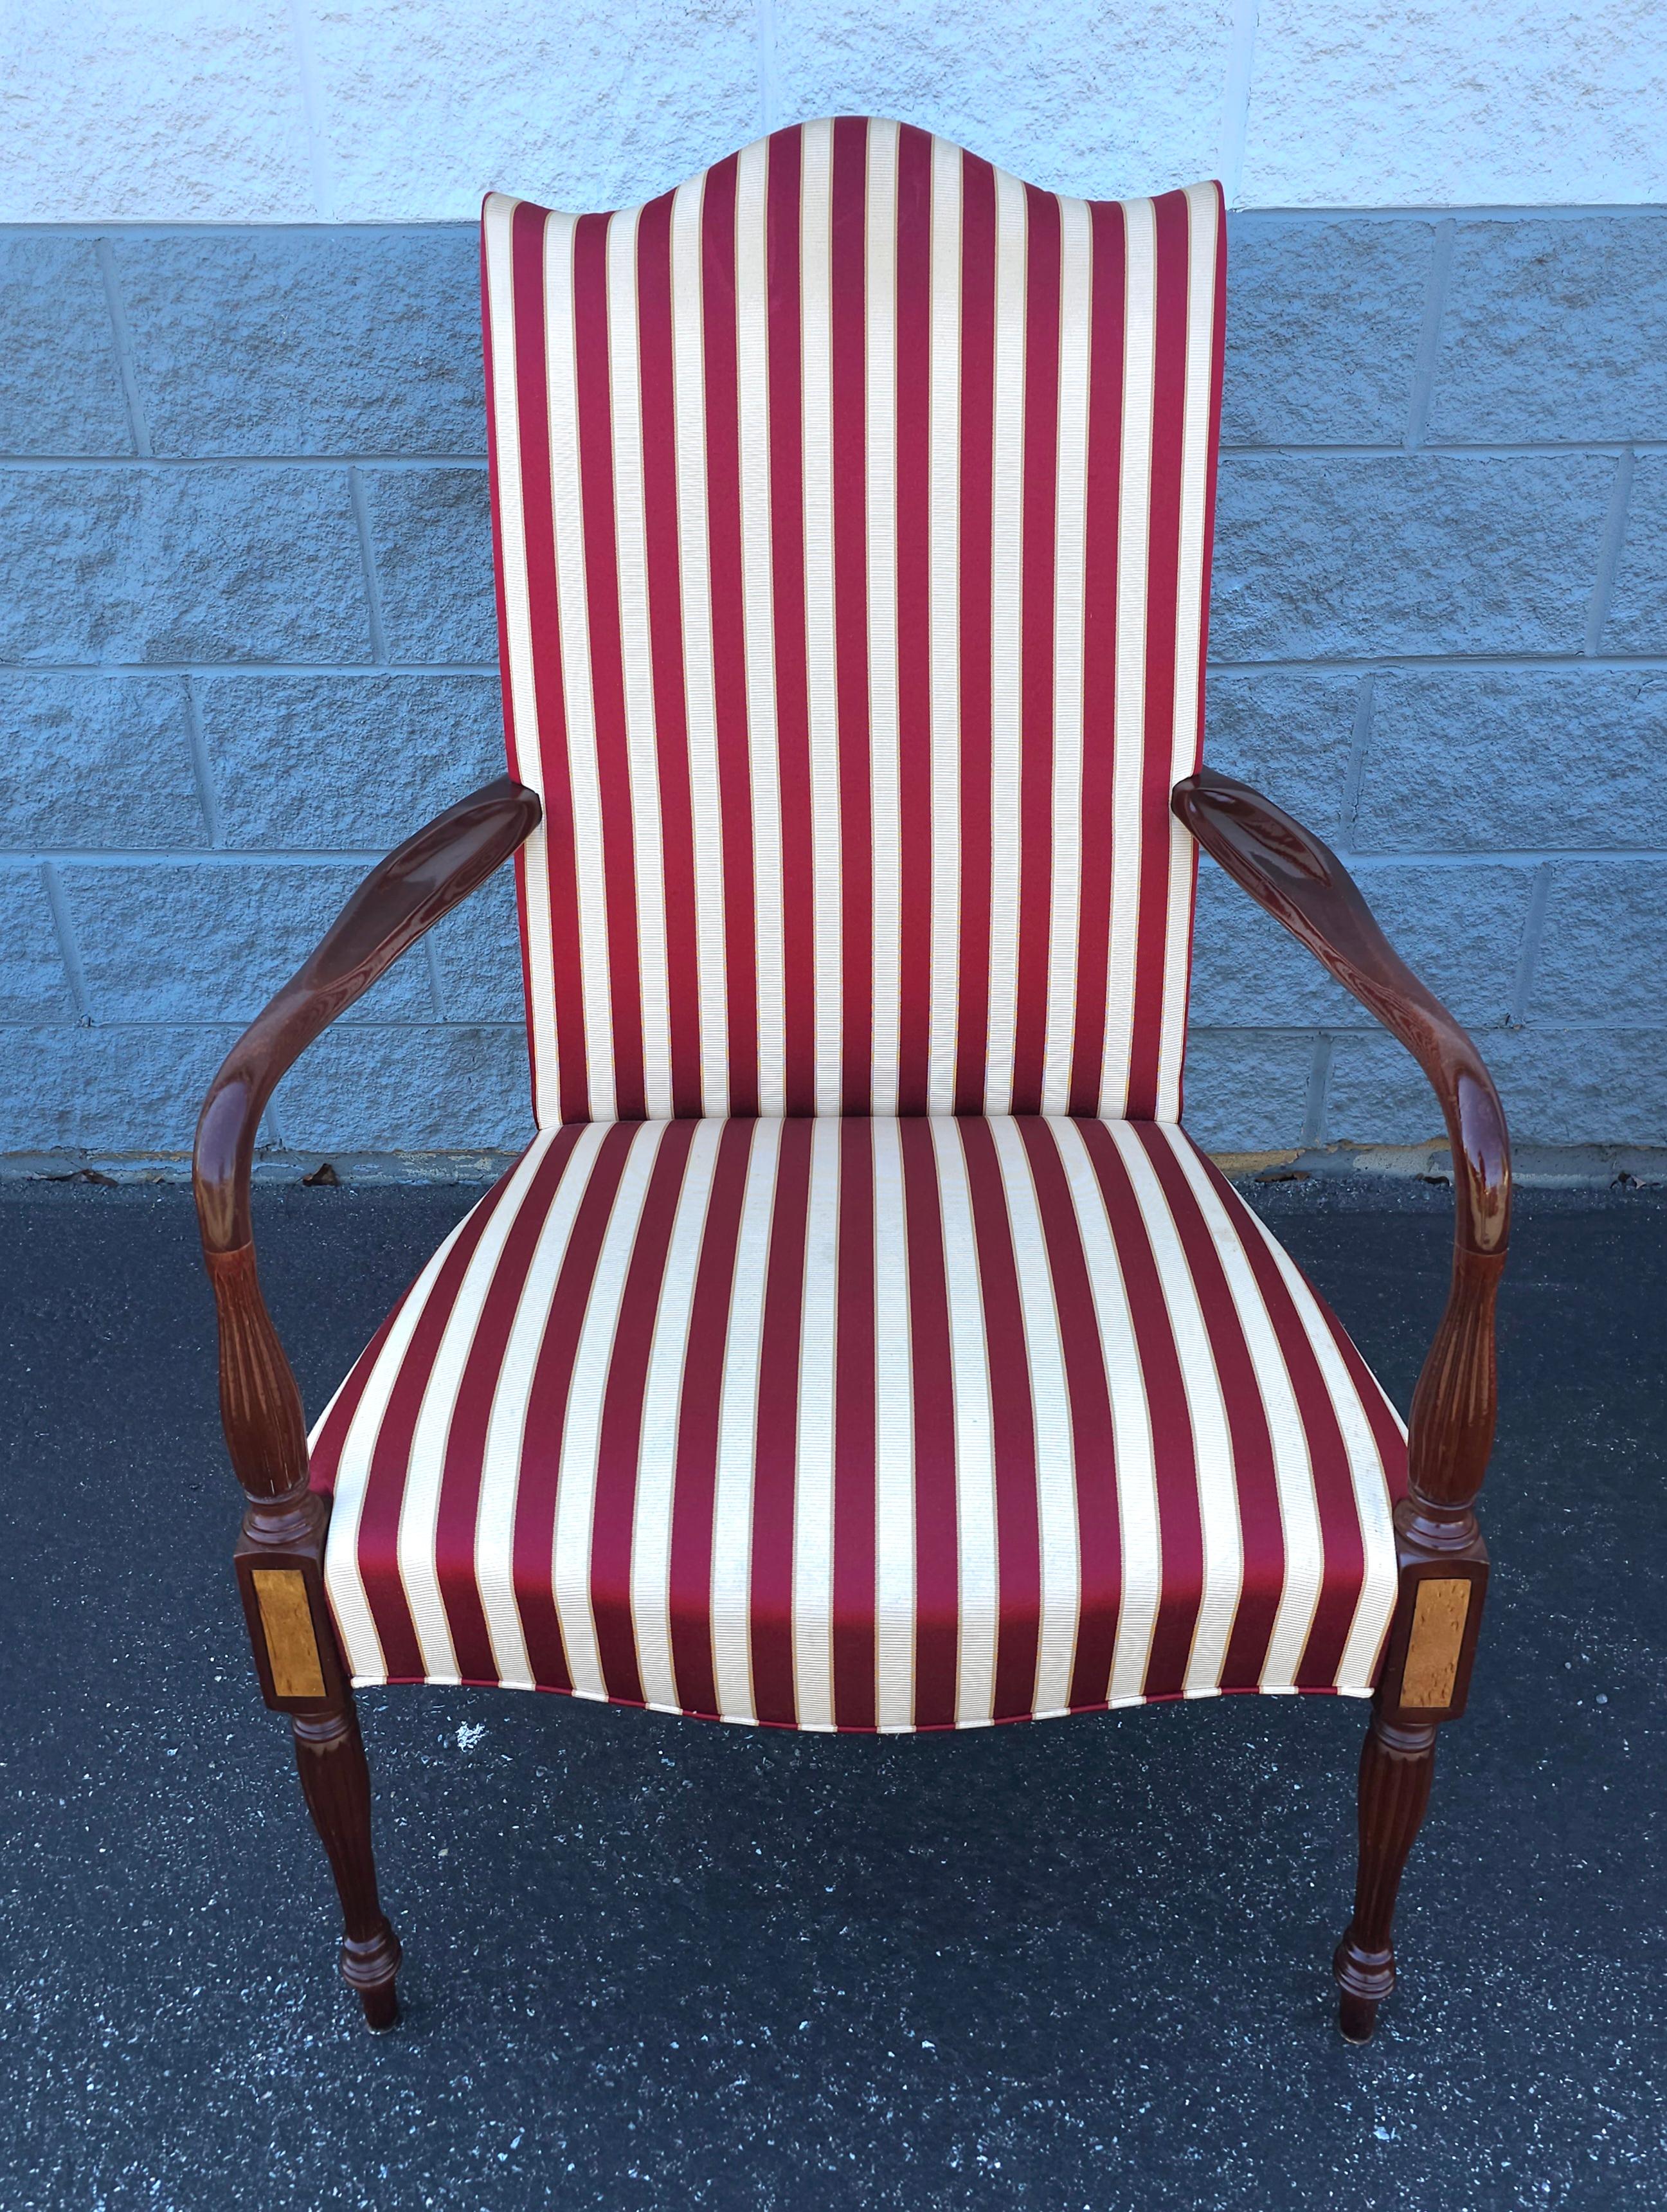 Hickory Chair Martha Washington Mahogany Upholstered Open Arm Chairs, Pair In Good Condition For Sale In Germantown, MD